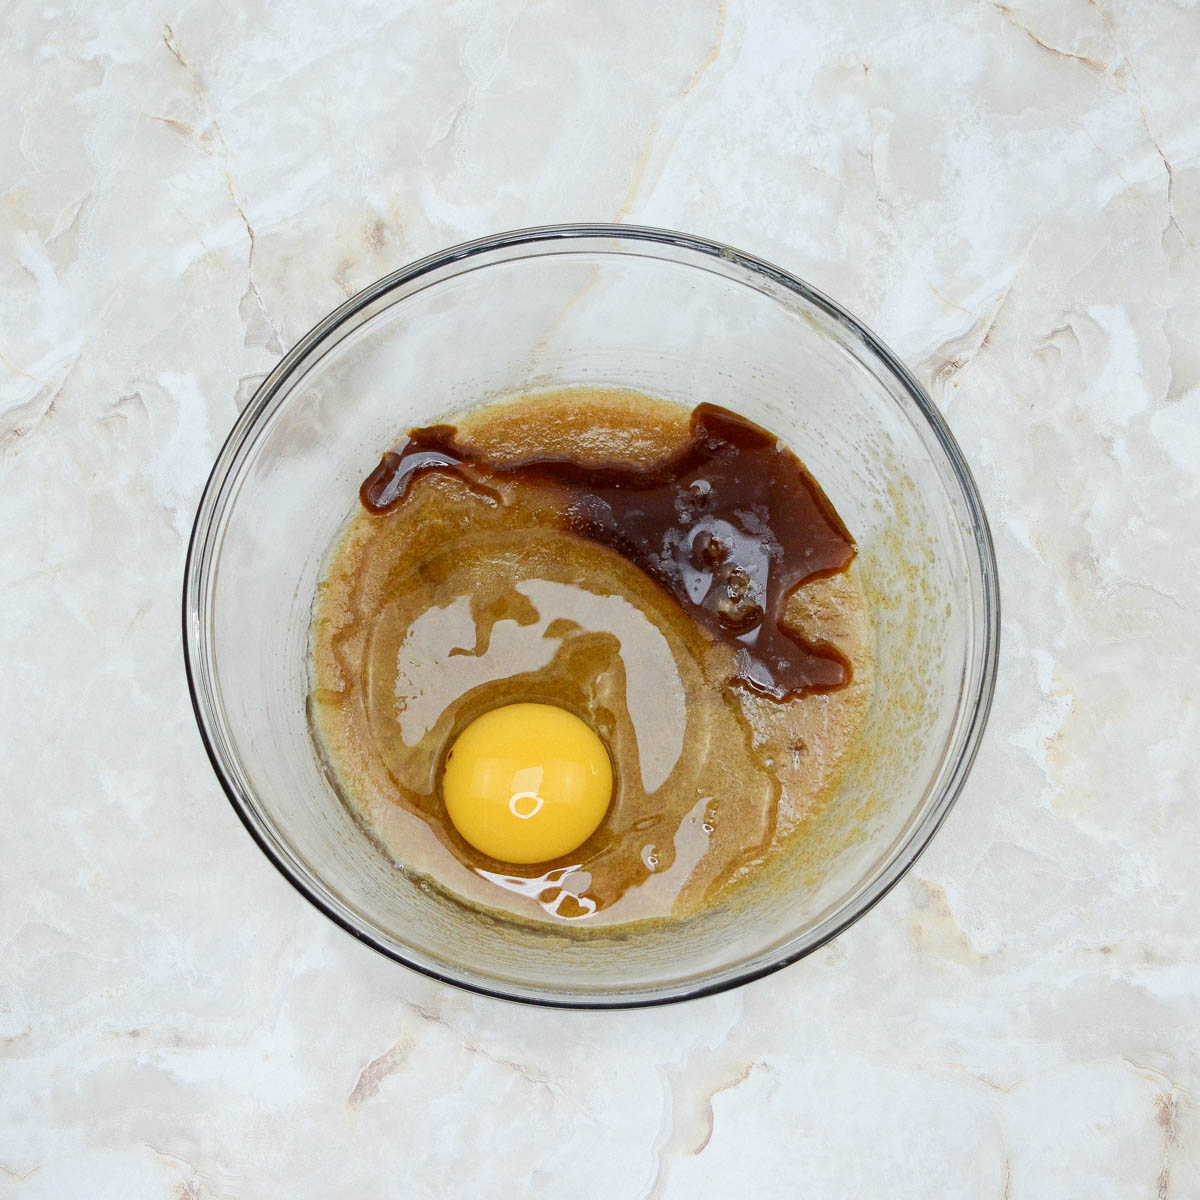 A glass bowl with an egg and sugar mixture in it.